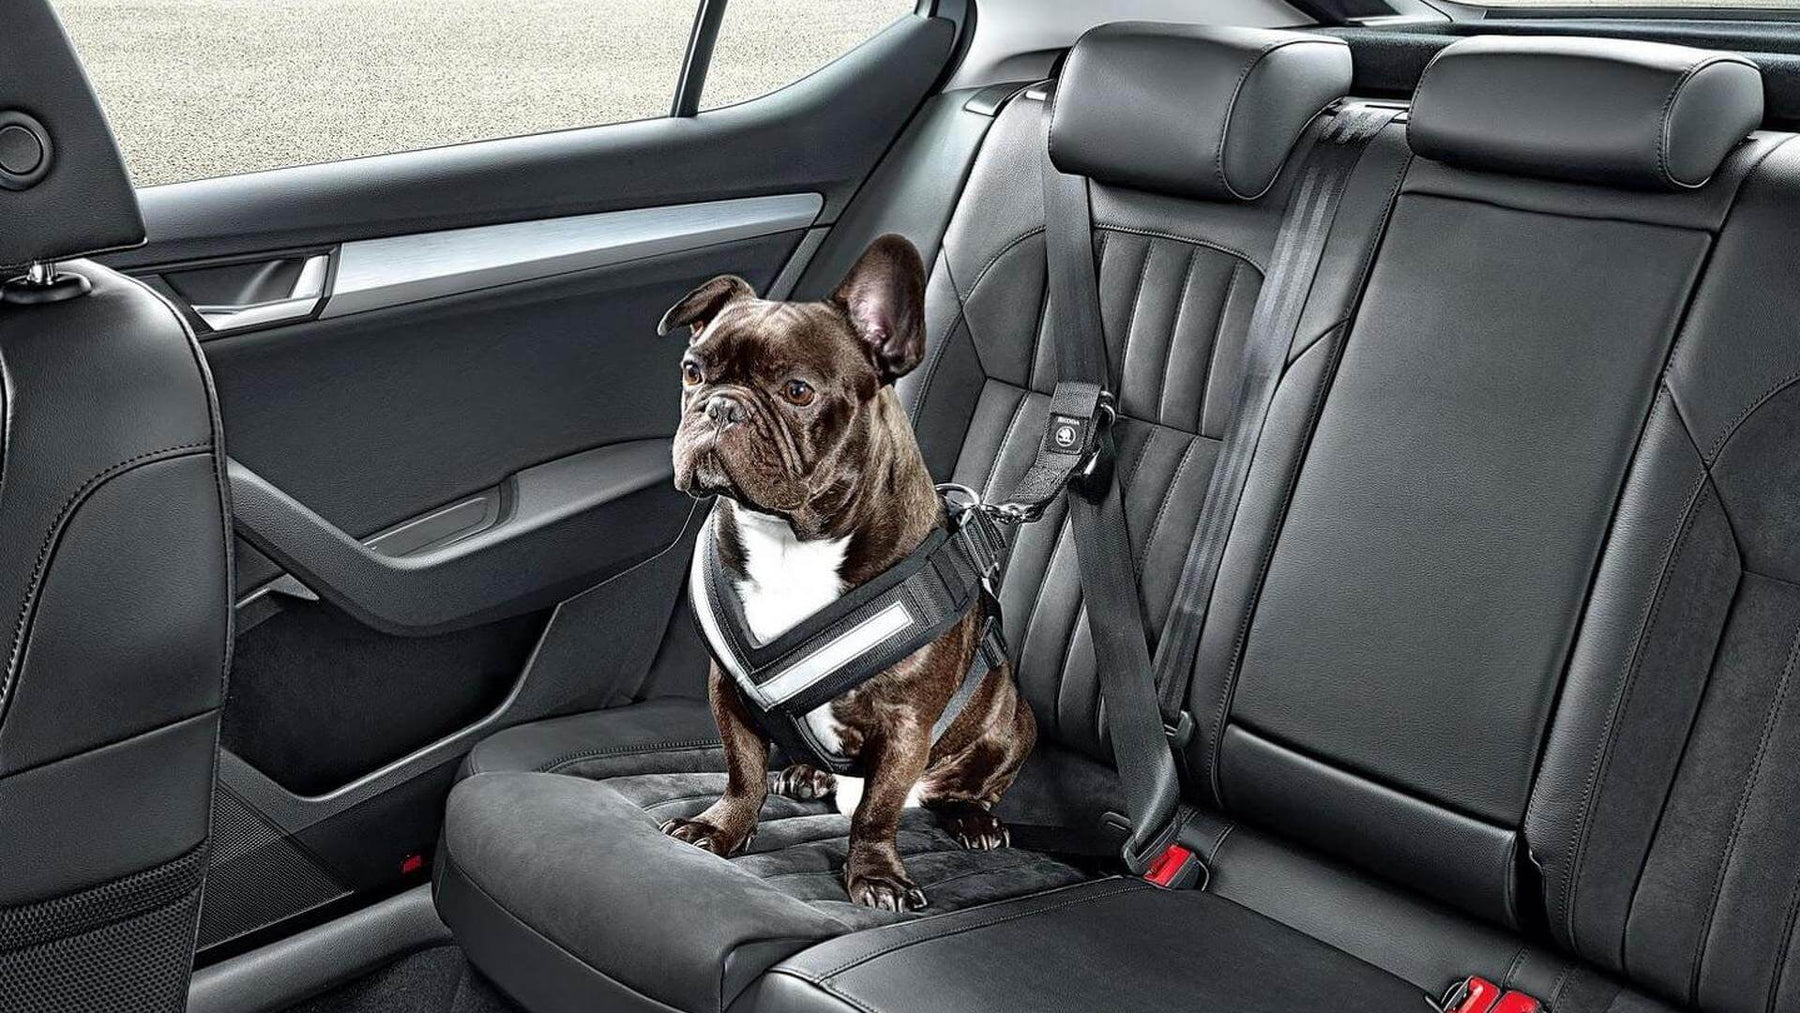 Find Out if Your State Requires Dog Seat Belts